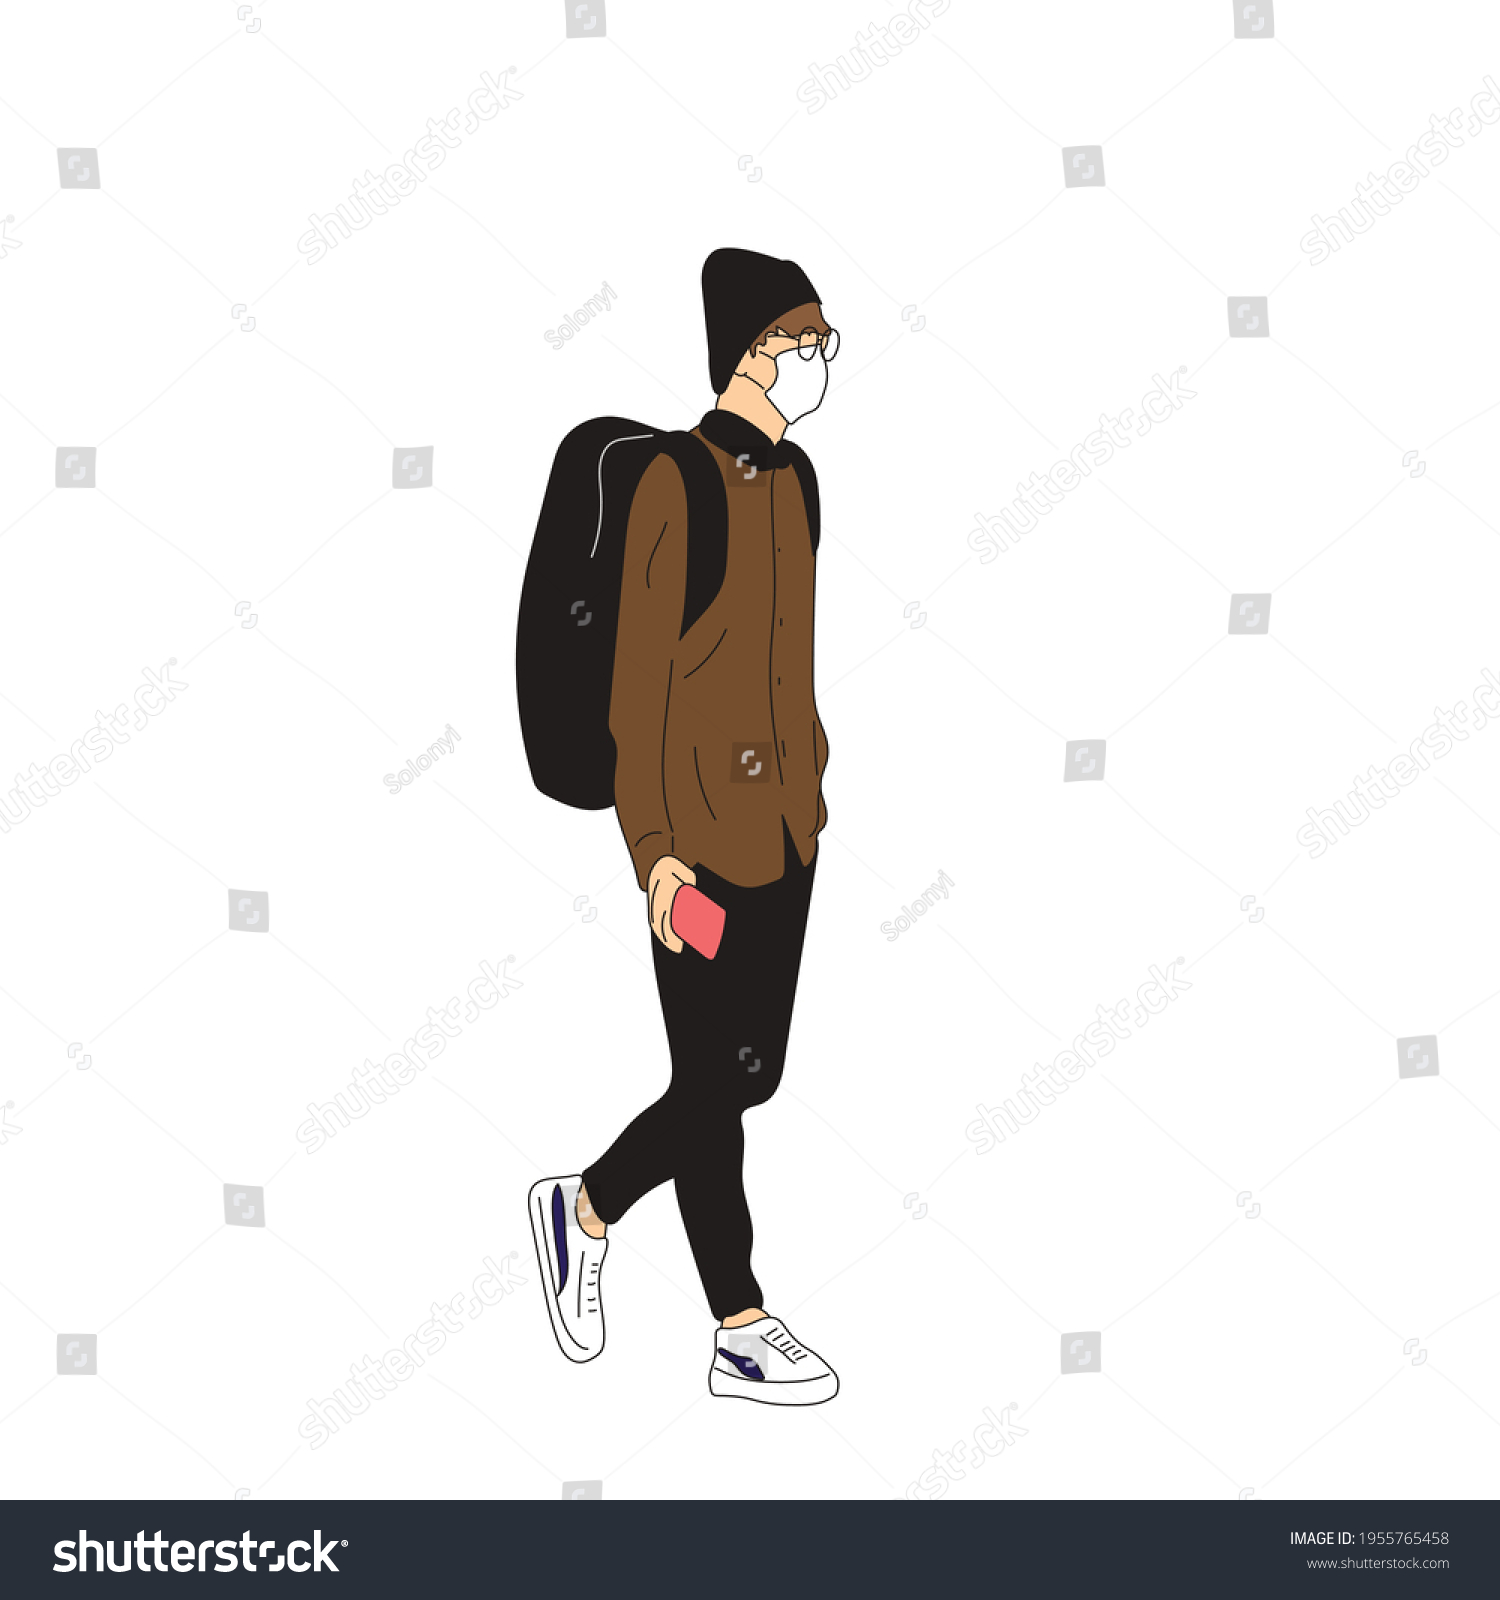 SVG of Vector illustration of Kpop street fashion. Street idols of Koreans. Kpop male idol fashion. A guy in black pants and a brown shirt.	 svg